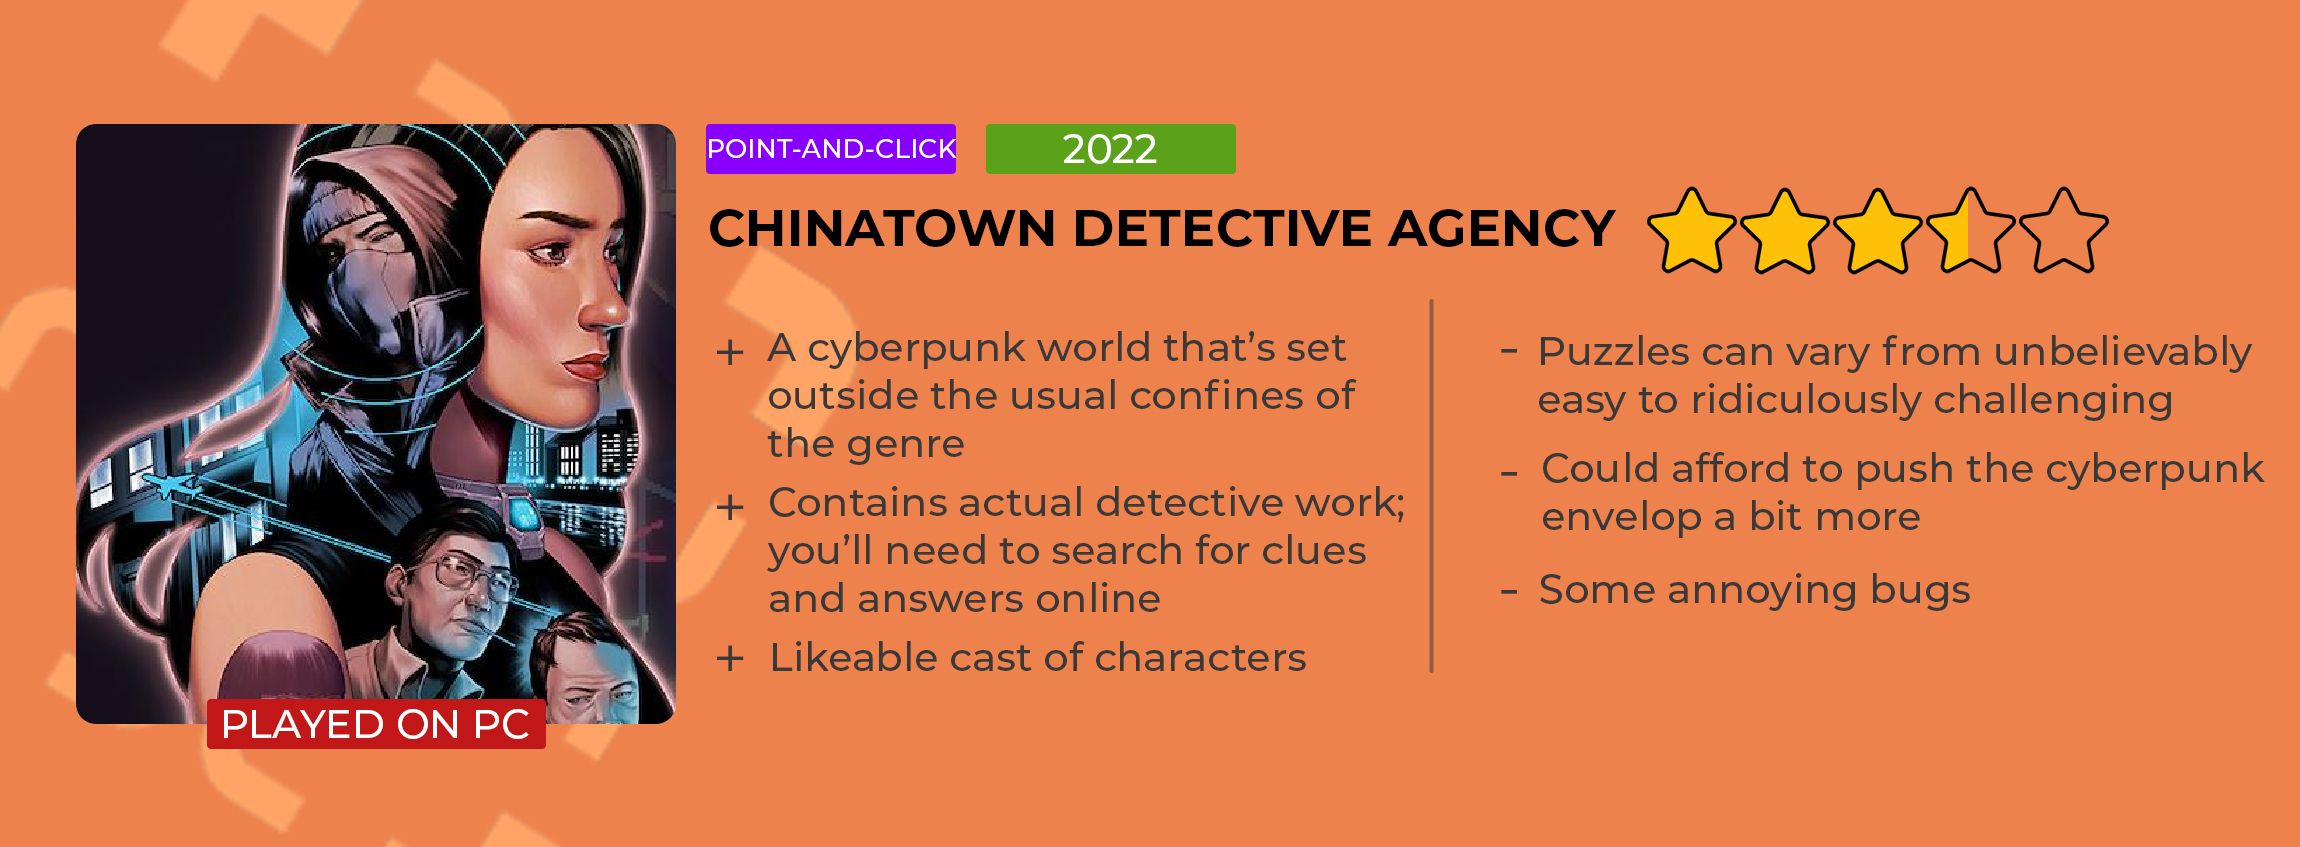 Chinatown Detective Agency Review Card